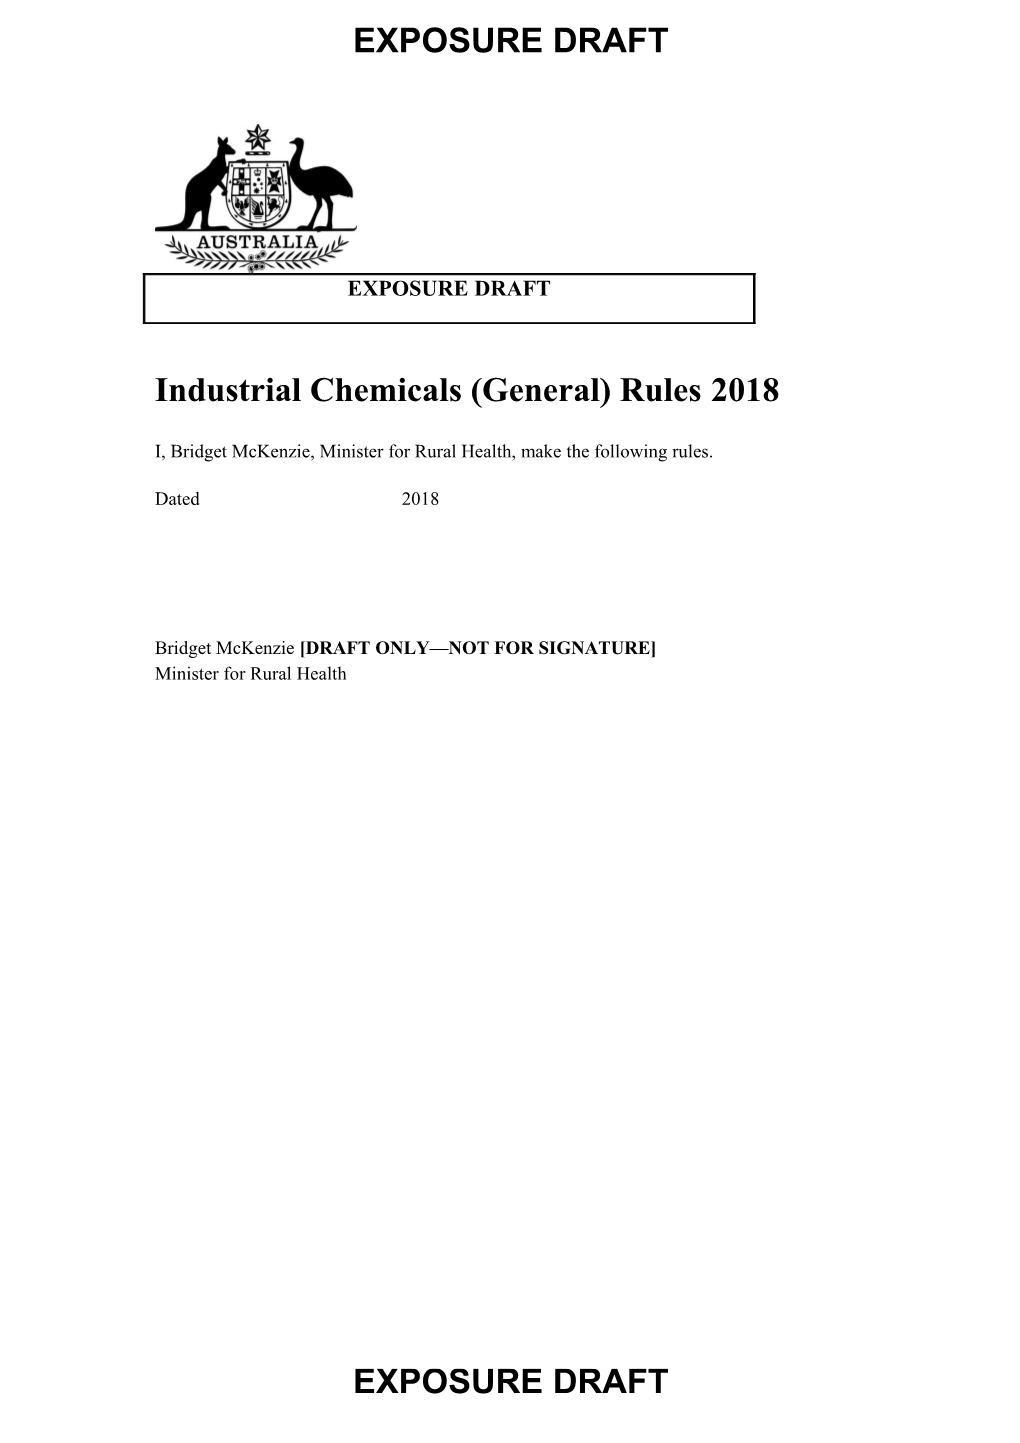 Industrial Chemicals (General) Rules2018